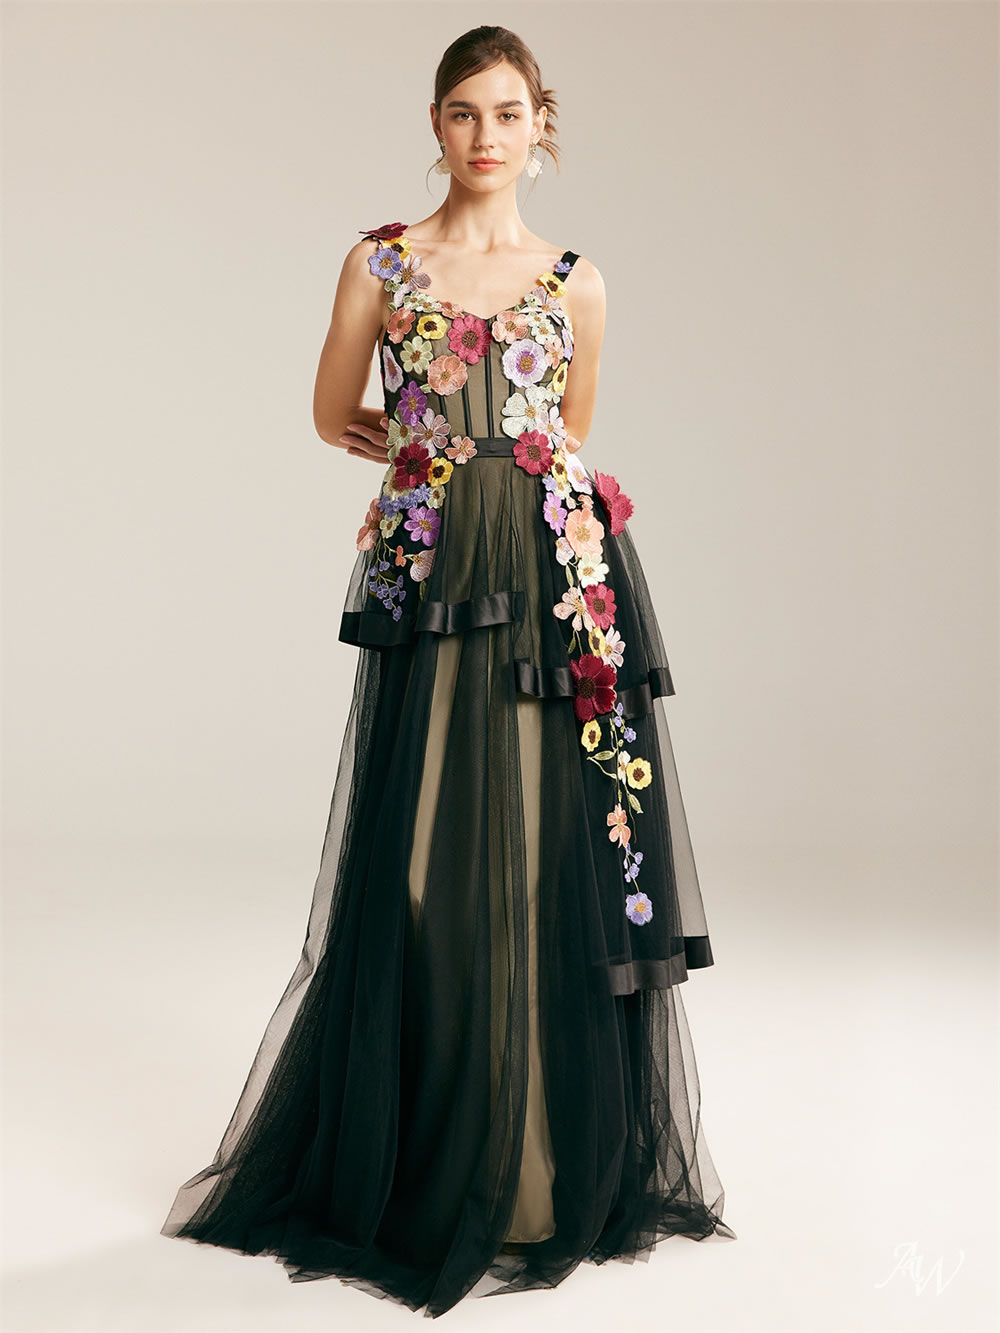 The beautiful floral bridesmaids dresses to walk down the aisle in this ...